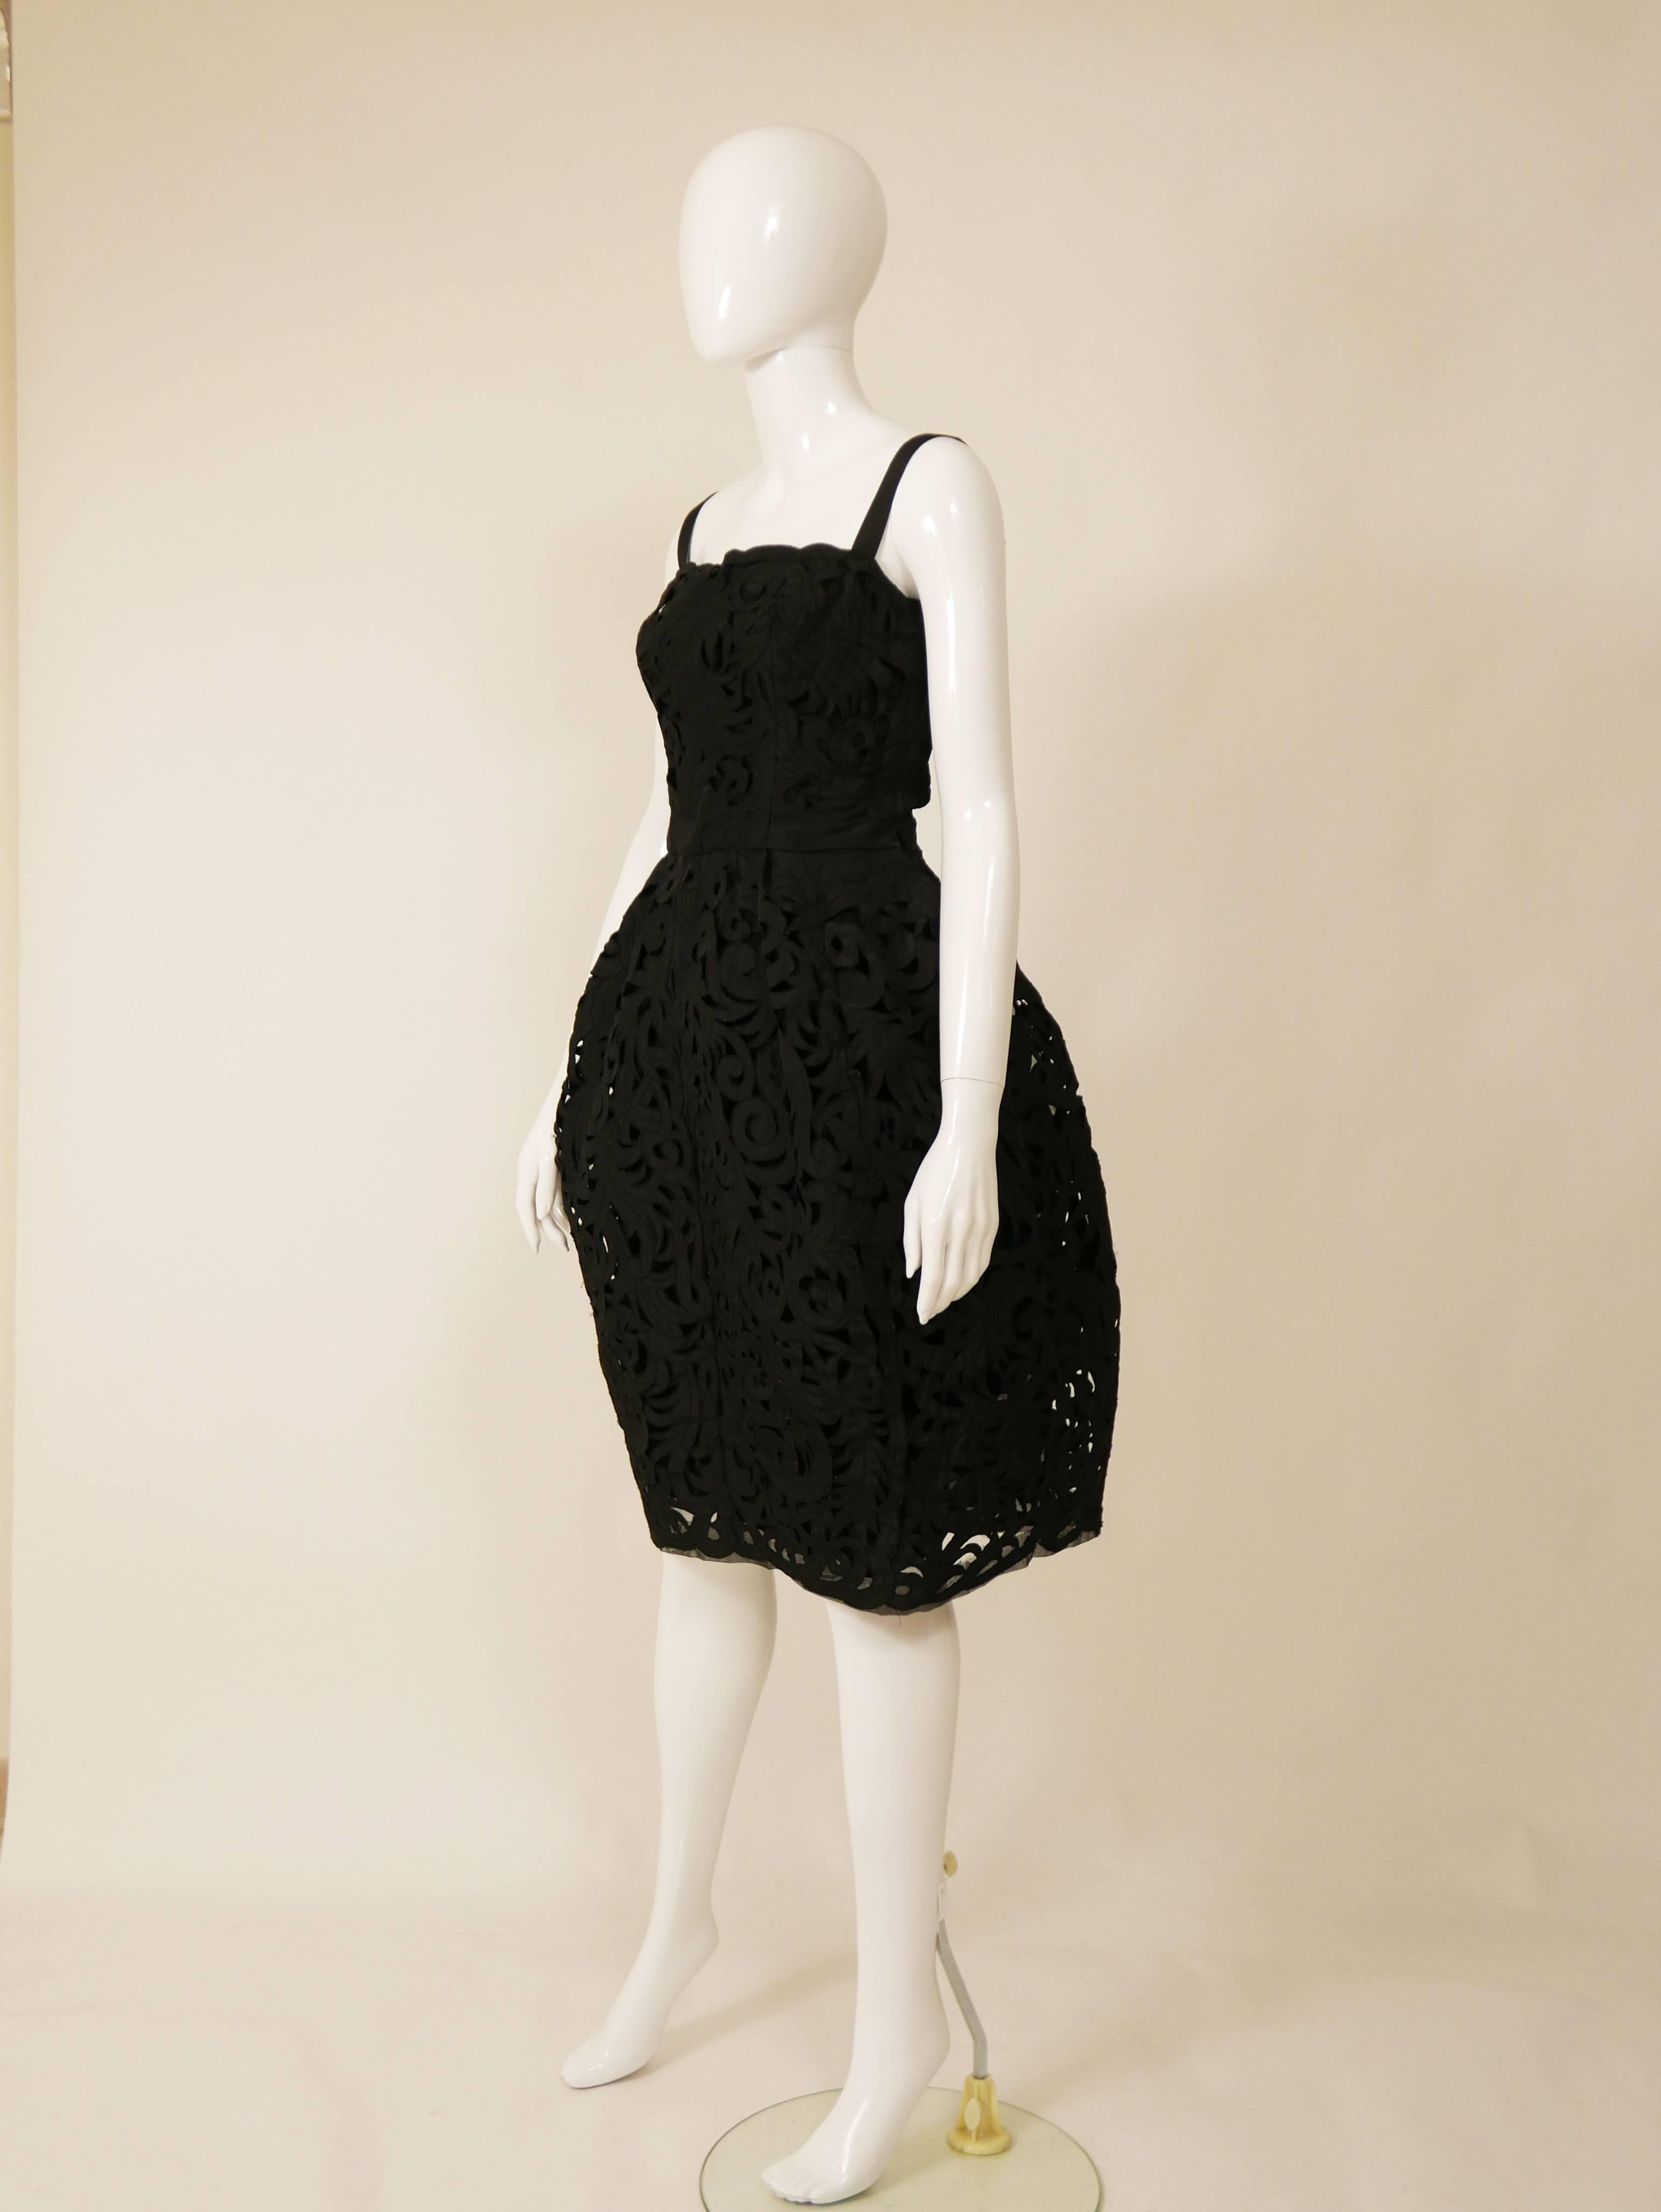 This glamorous and sexy 1950s italian tailor Germana Marucelli cocktail dress is in fabulous black fabric with amazing embroidered details. The skirt has a tulle reinforcement to make it rigid. It's fully lined and has double side zip